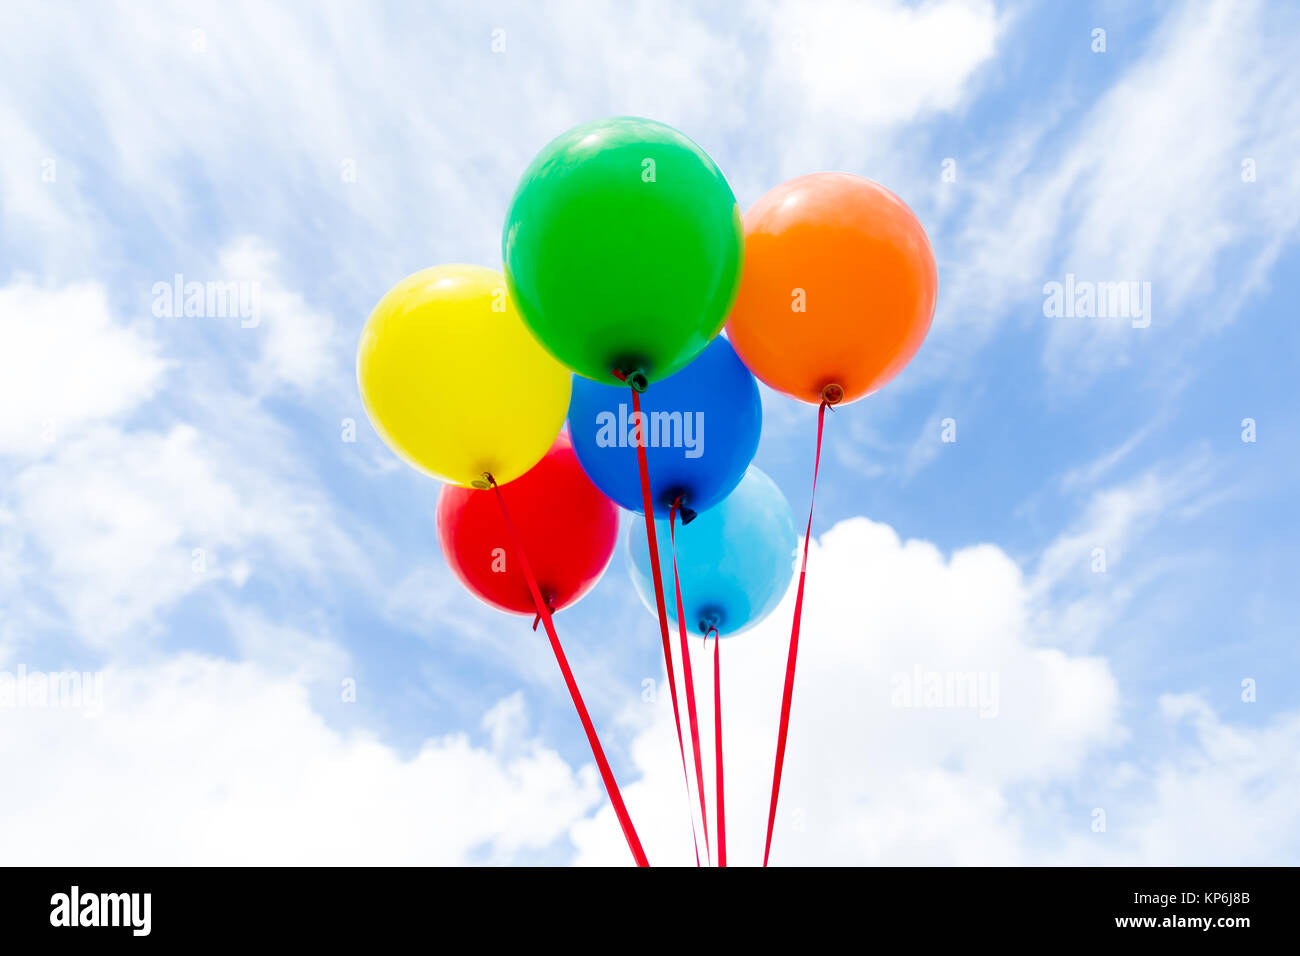 A group of colorful balloons with blue sky background Stock Photo